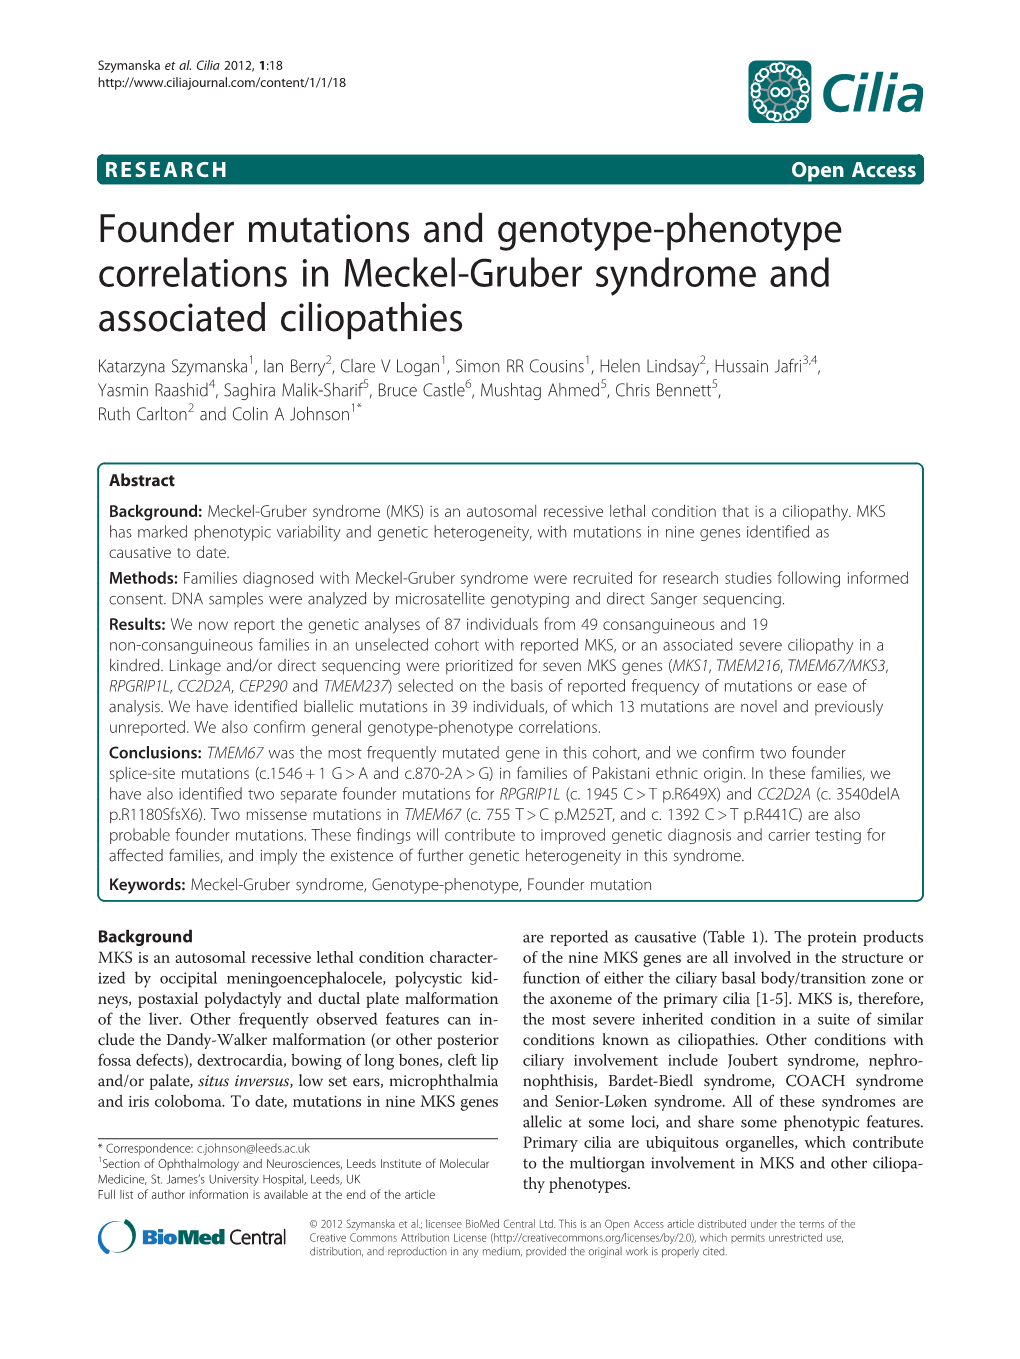 Founder Mutations and Genotype-Phenotype Correlations In